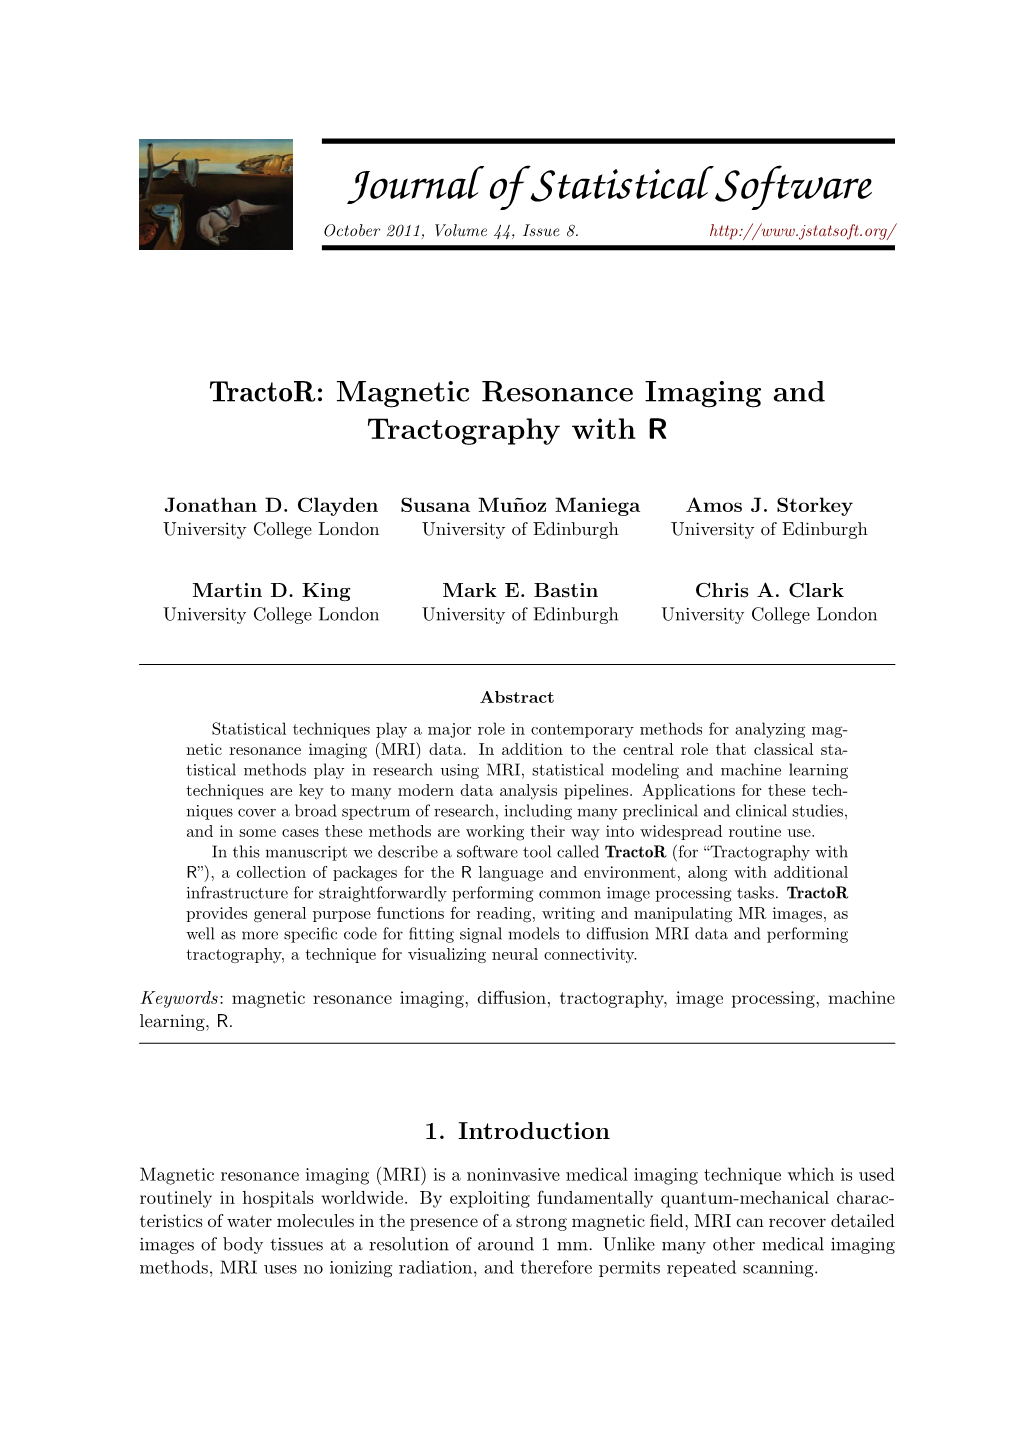 Magnetic Resonance Imaging and Tractography with R